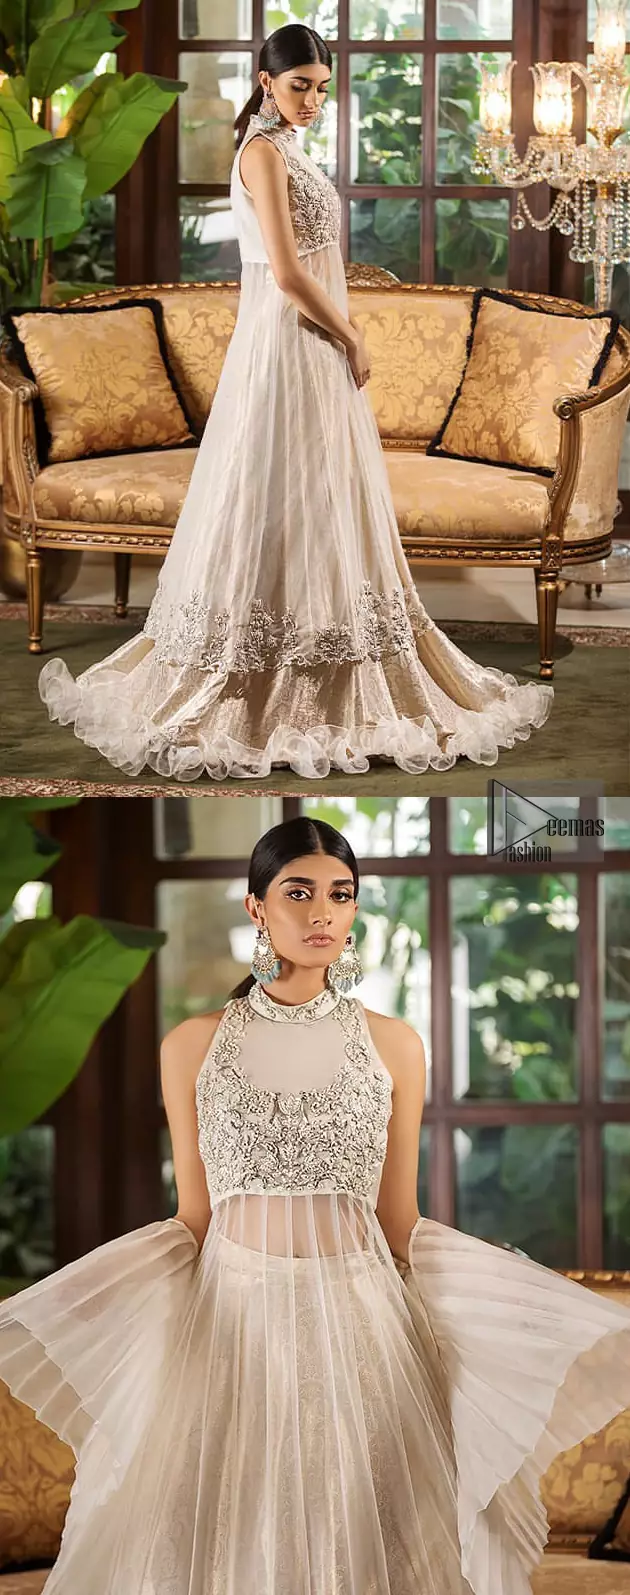 This halter neck frock is majestic beauty. Delicately crafted and personifying chic elegance with an element of grandiose. A full heavily embroidered bodice done with silver and gray zardozi work. The bottom of the frock is enhanced with rich floral embroidery and wide hemline. It comprises with brocade lehenga and net frilled lift the whole lehenga bottom. Complete the look with tea rose dupatta sprinkled with sequins on all over the ground.